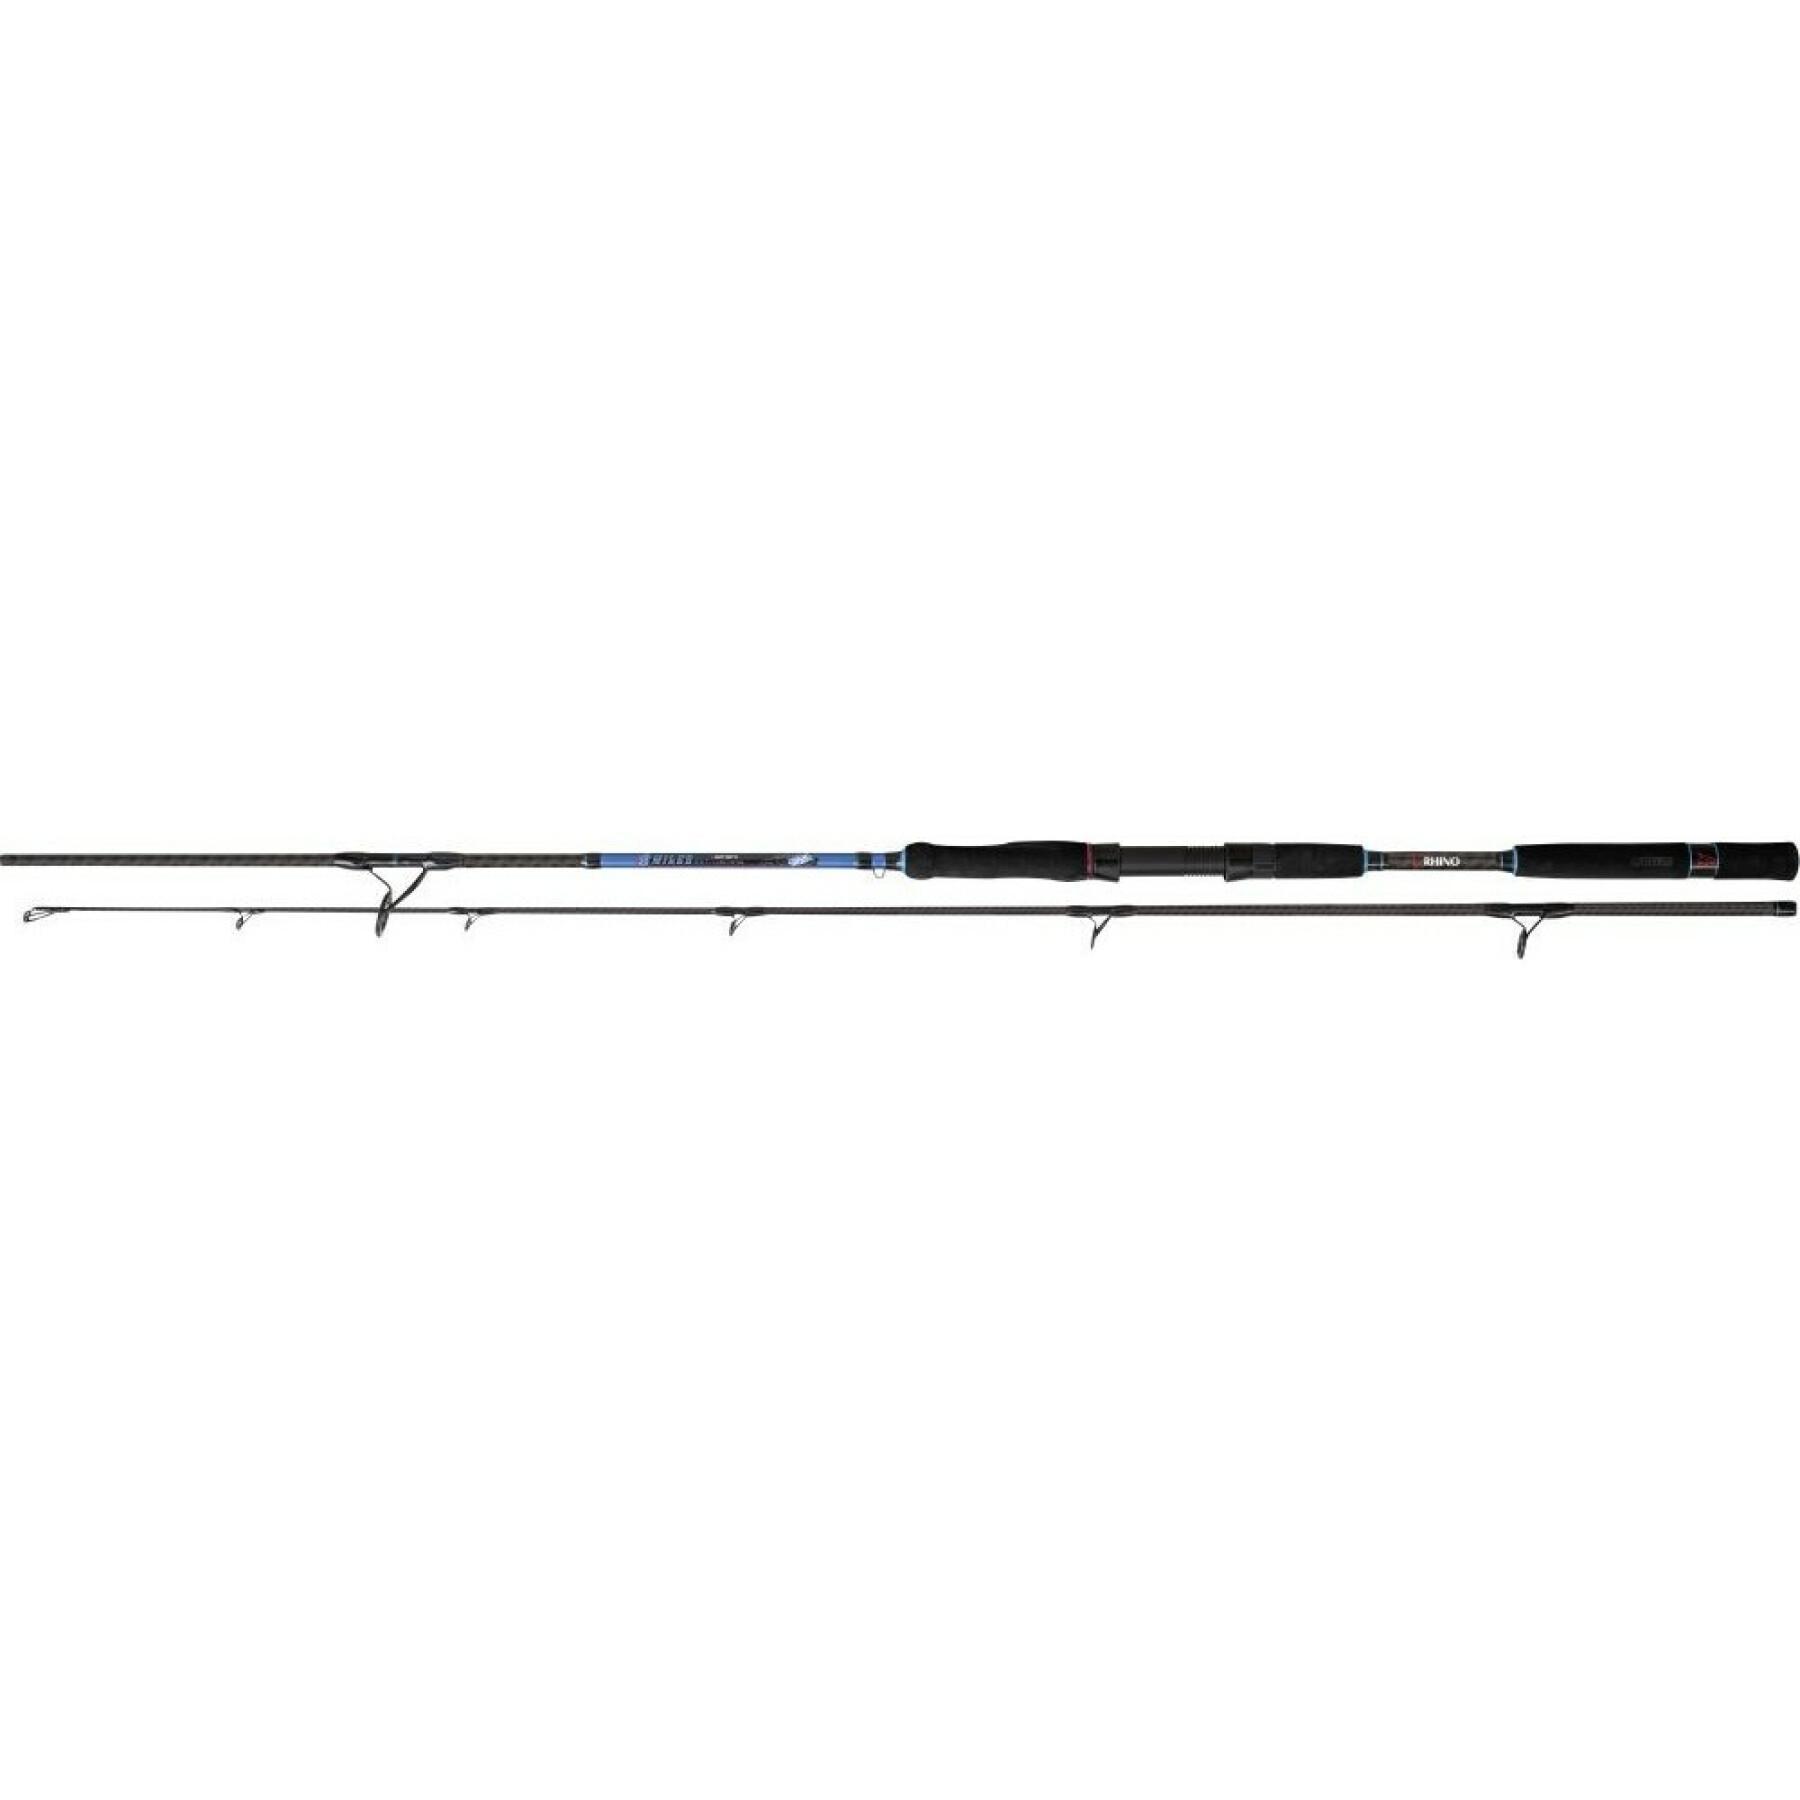 Trzcina Rhino 8 Miles Out Boat Cast M 165g